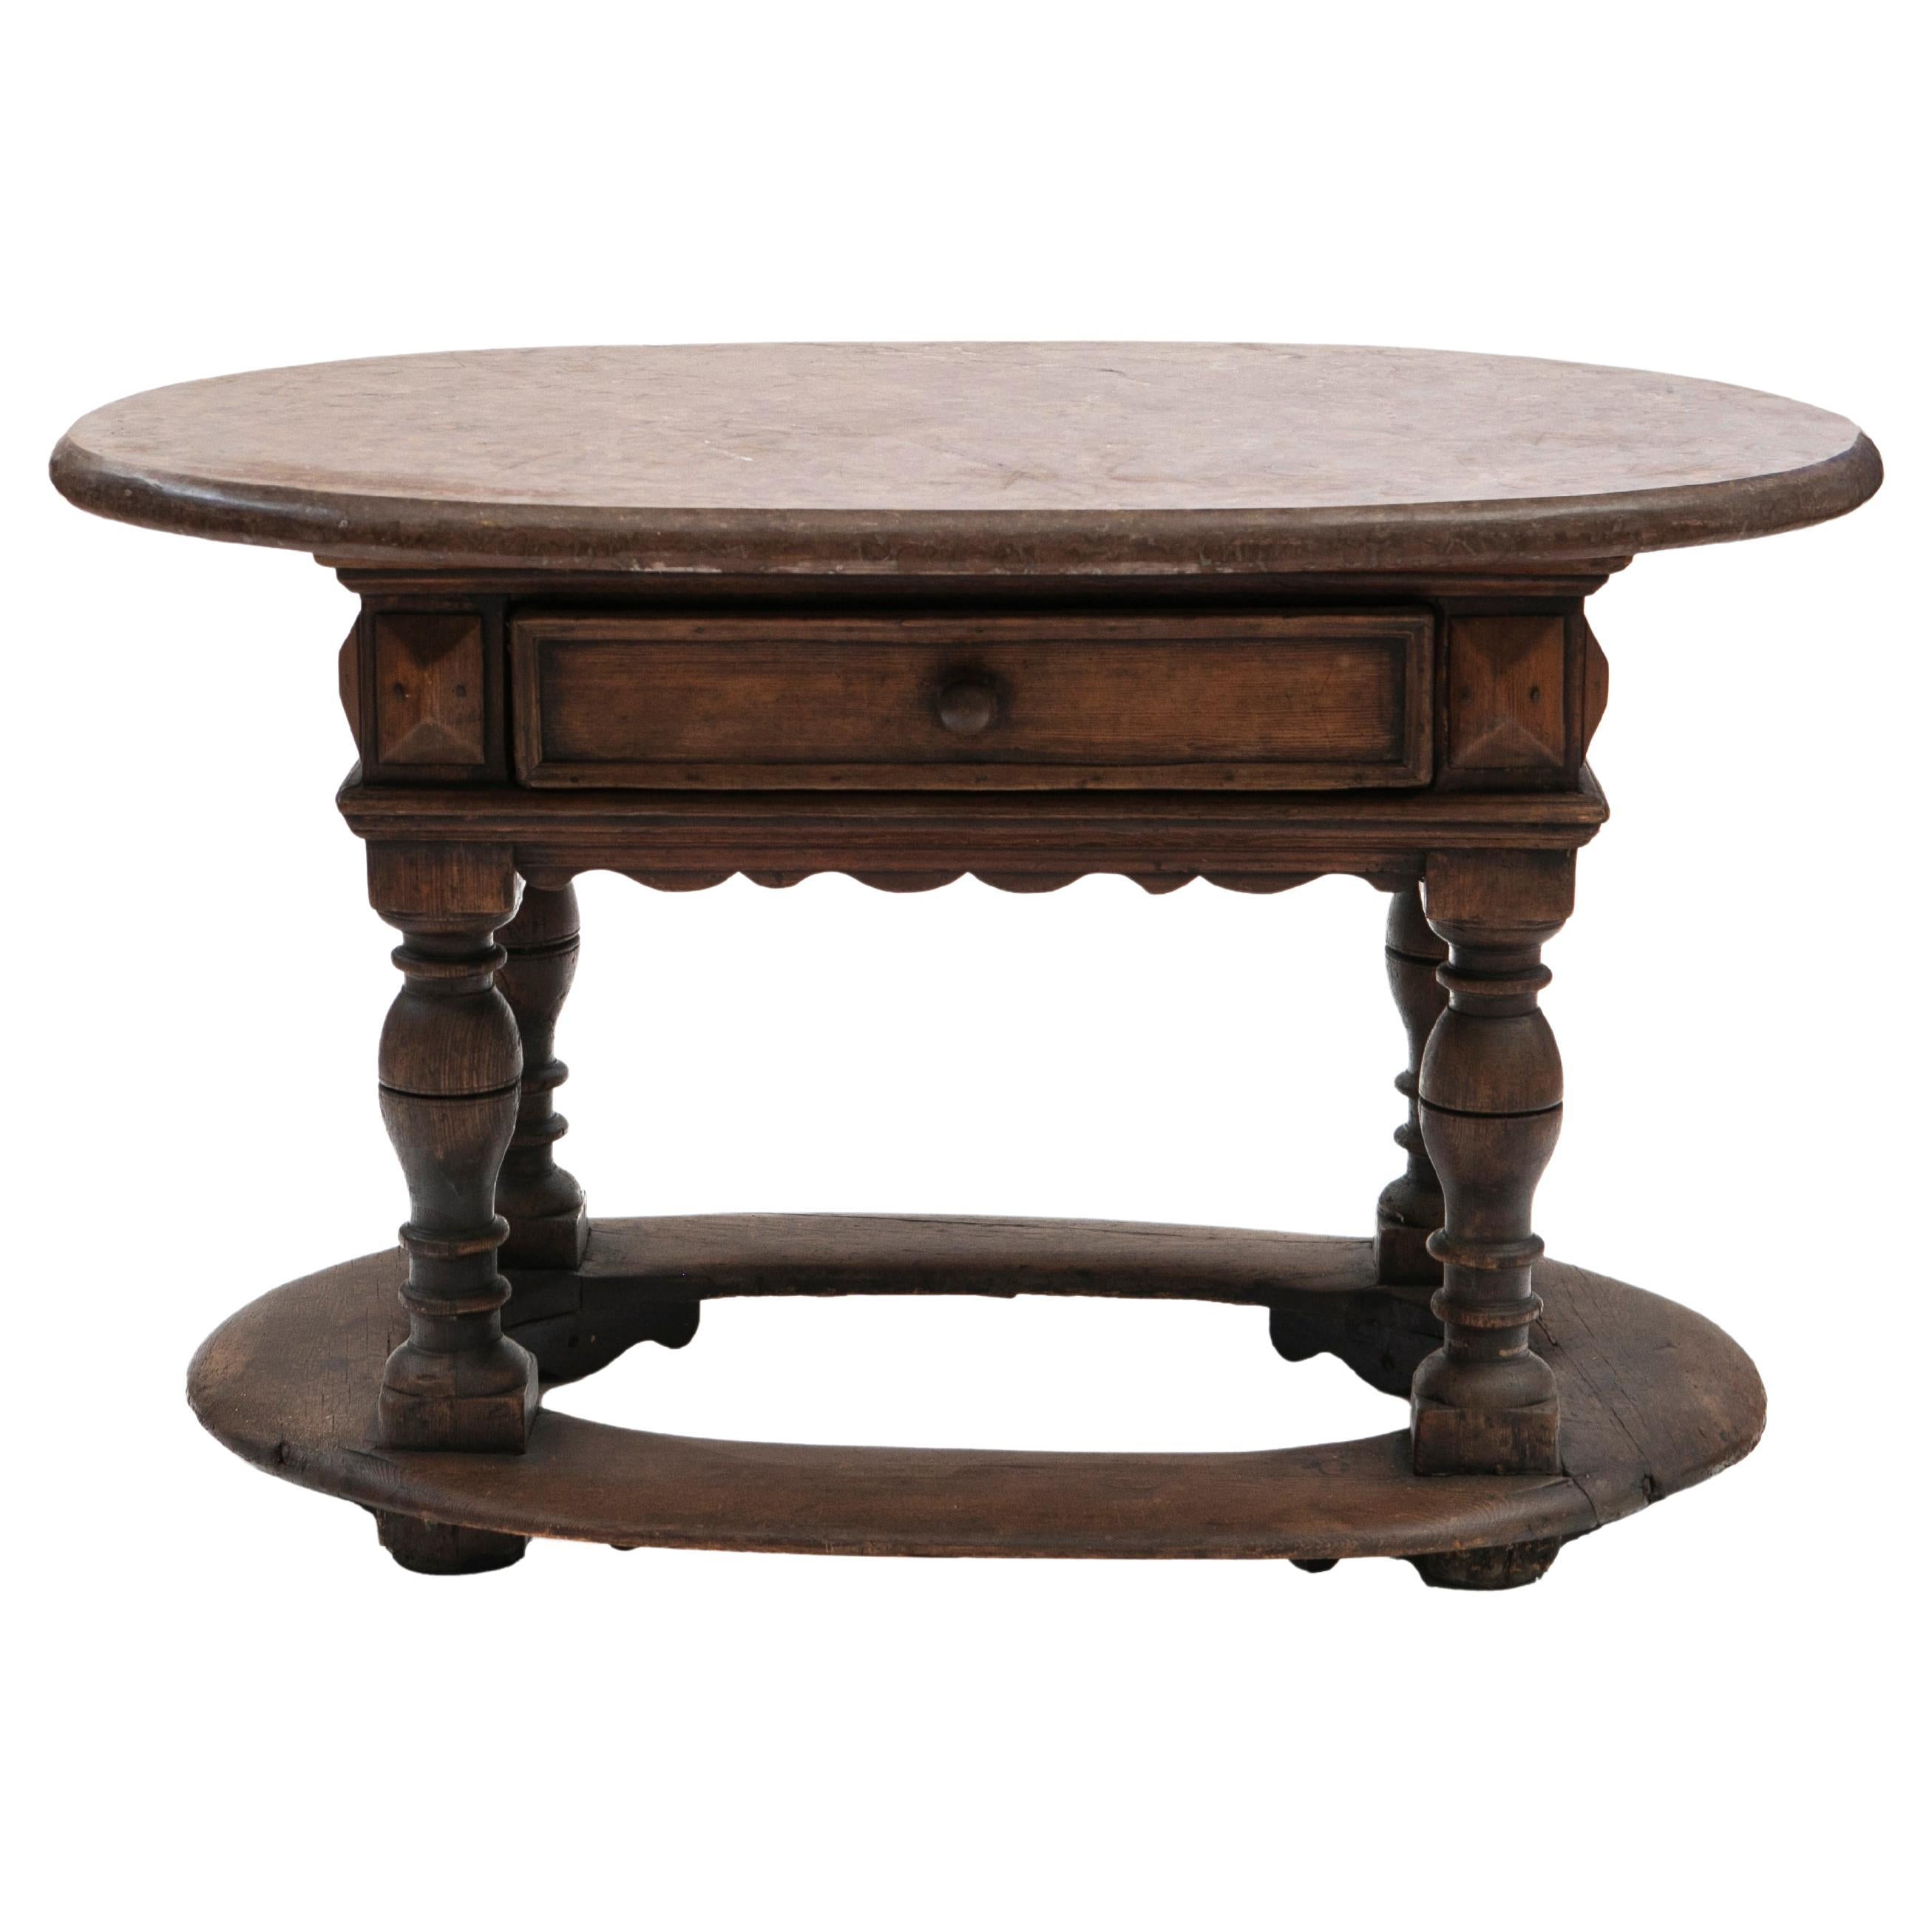 Oval Swedish Baroque Table / Center table. Oak with Fossil Limestone Top For Sale